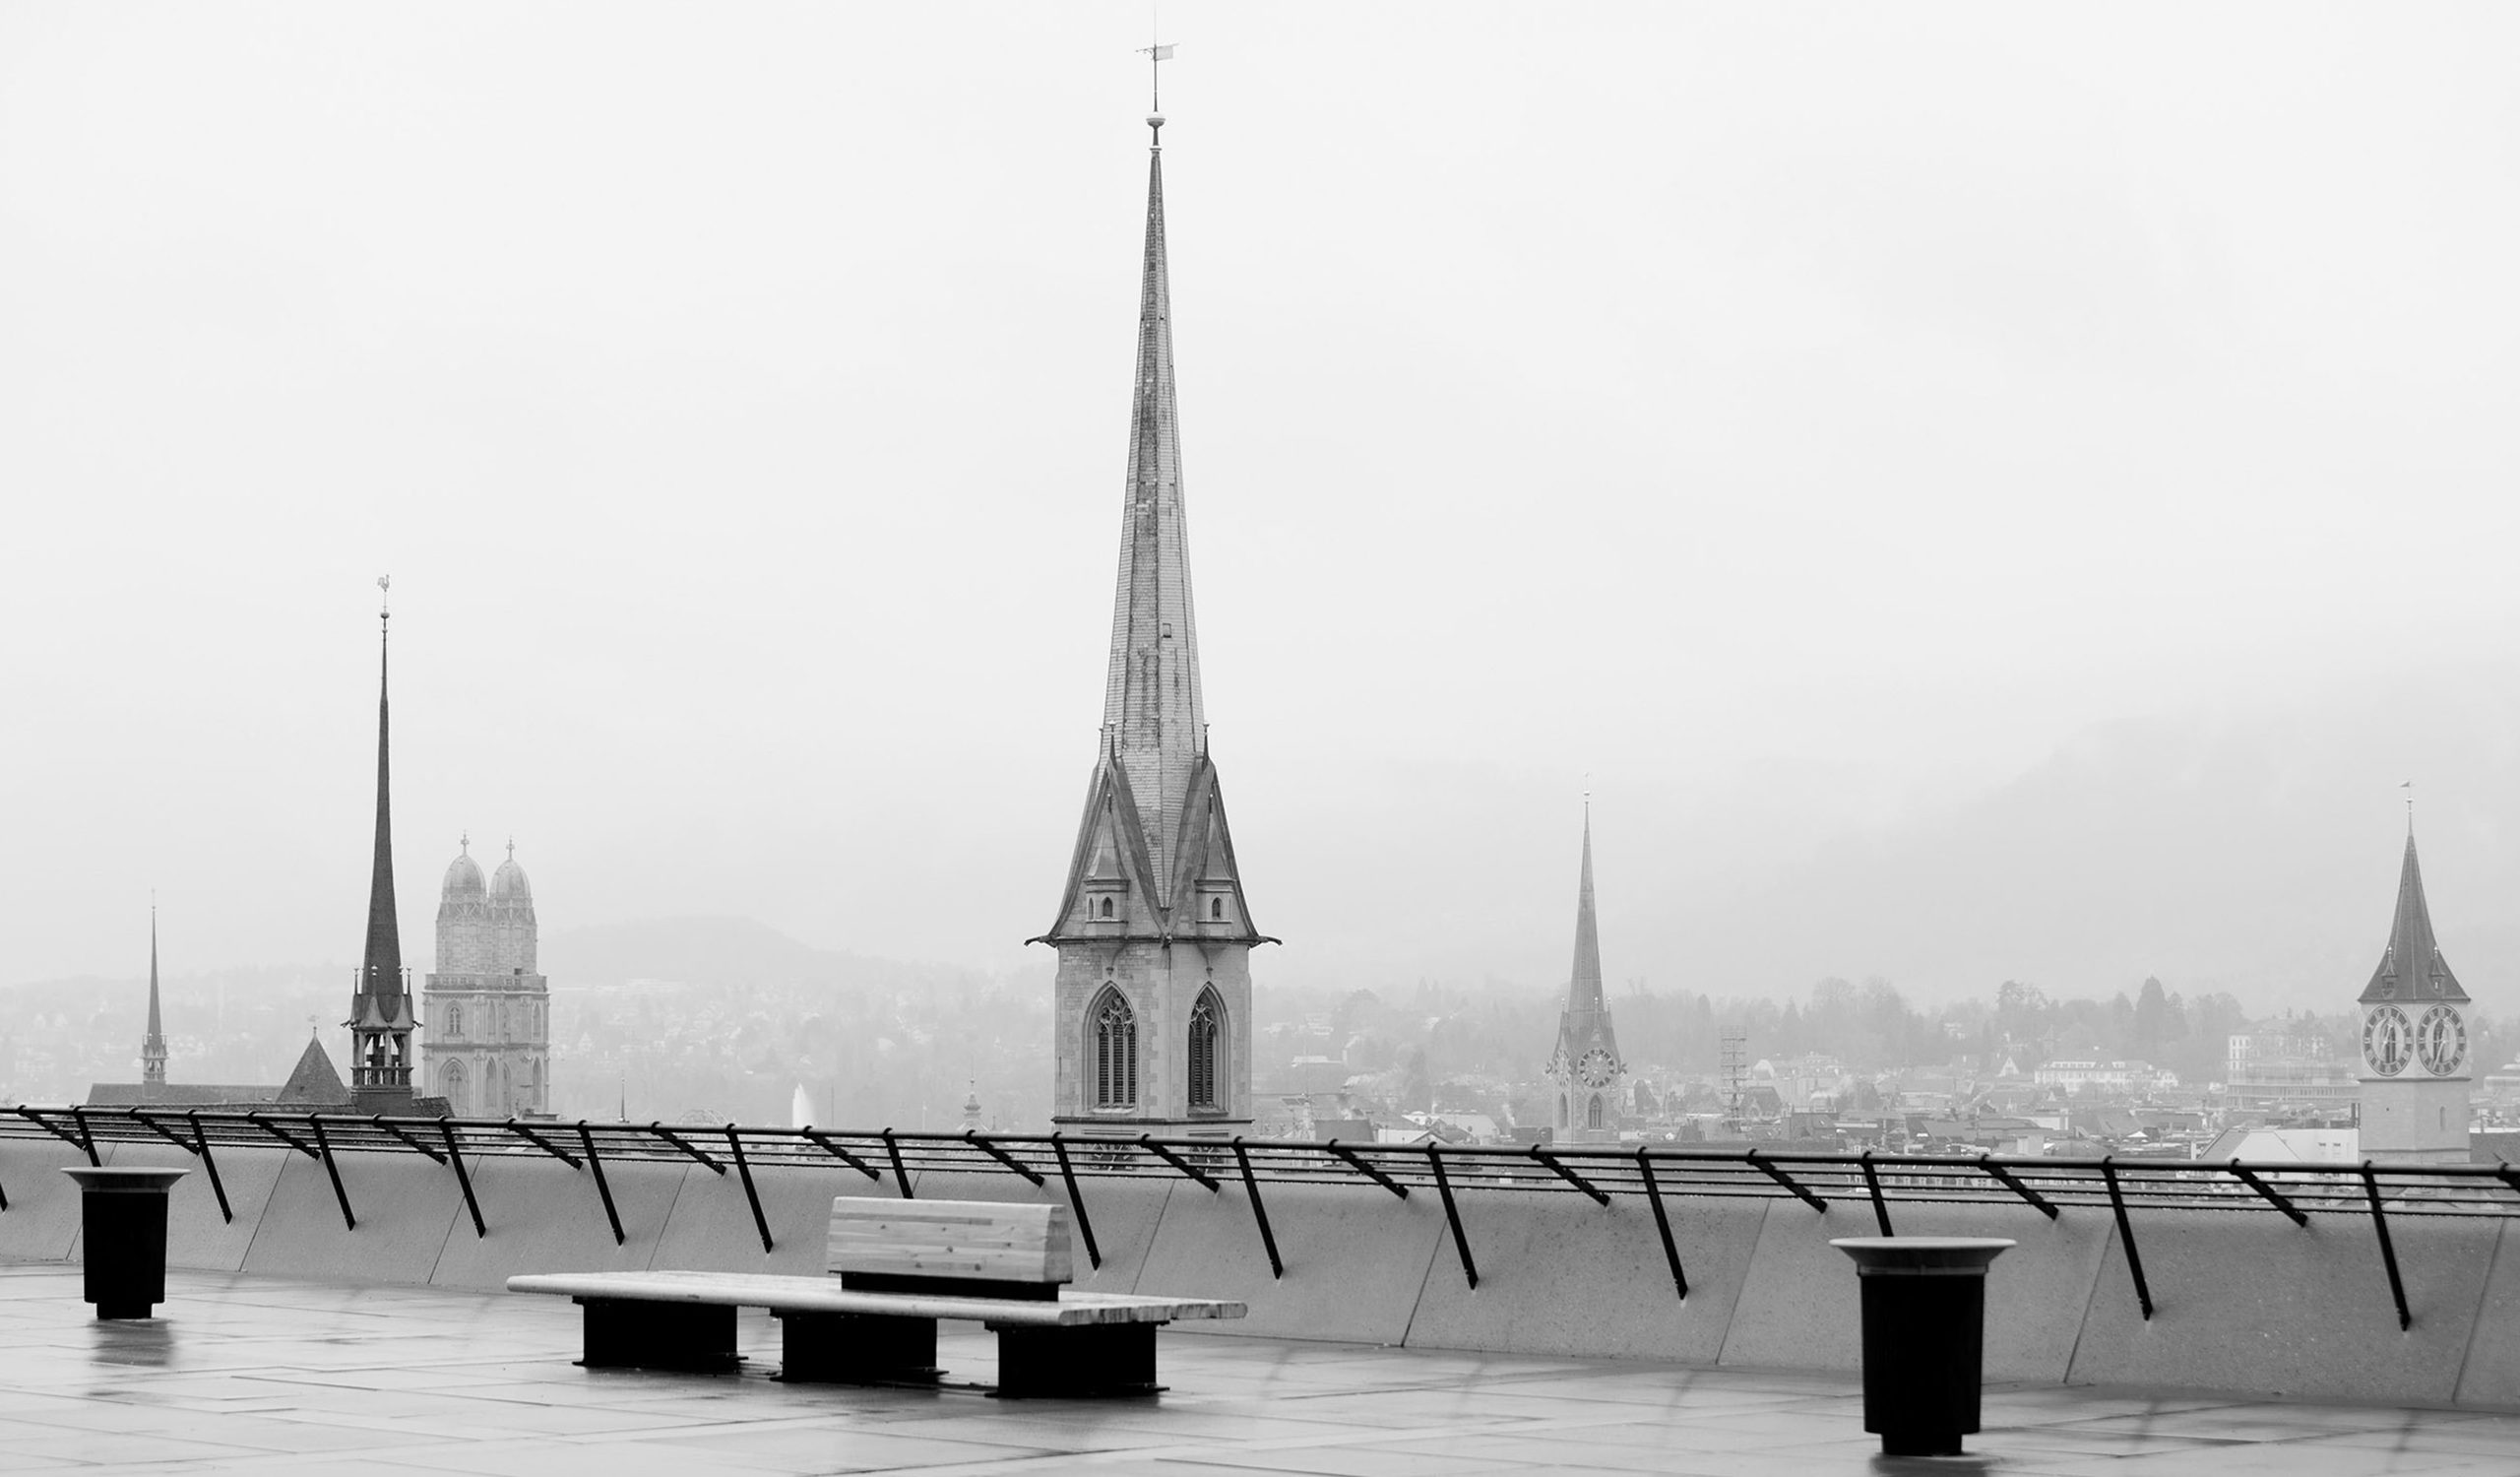 The view overlooking the old town of Zurich from Zurich University and ETH. Photography Justin Hession